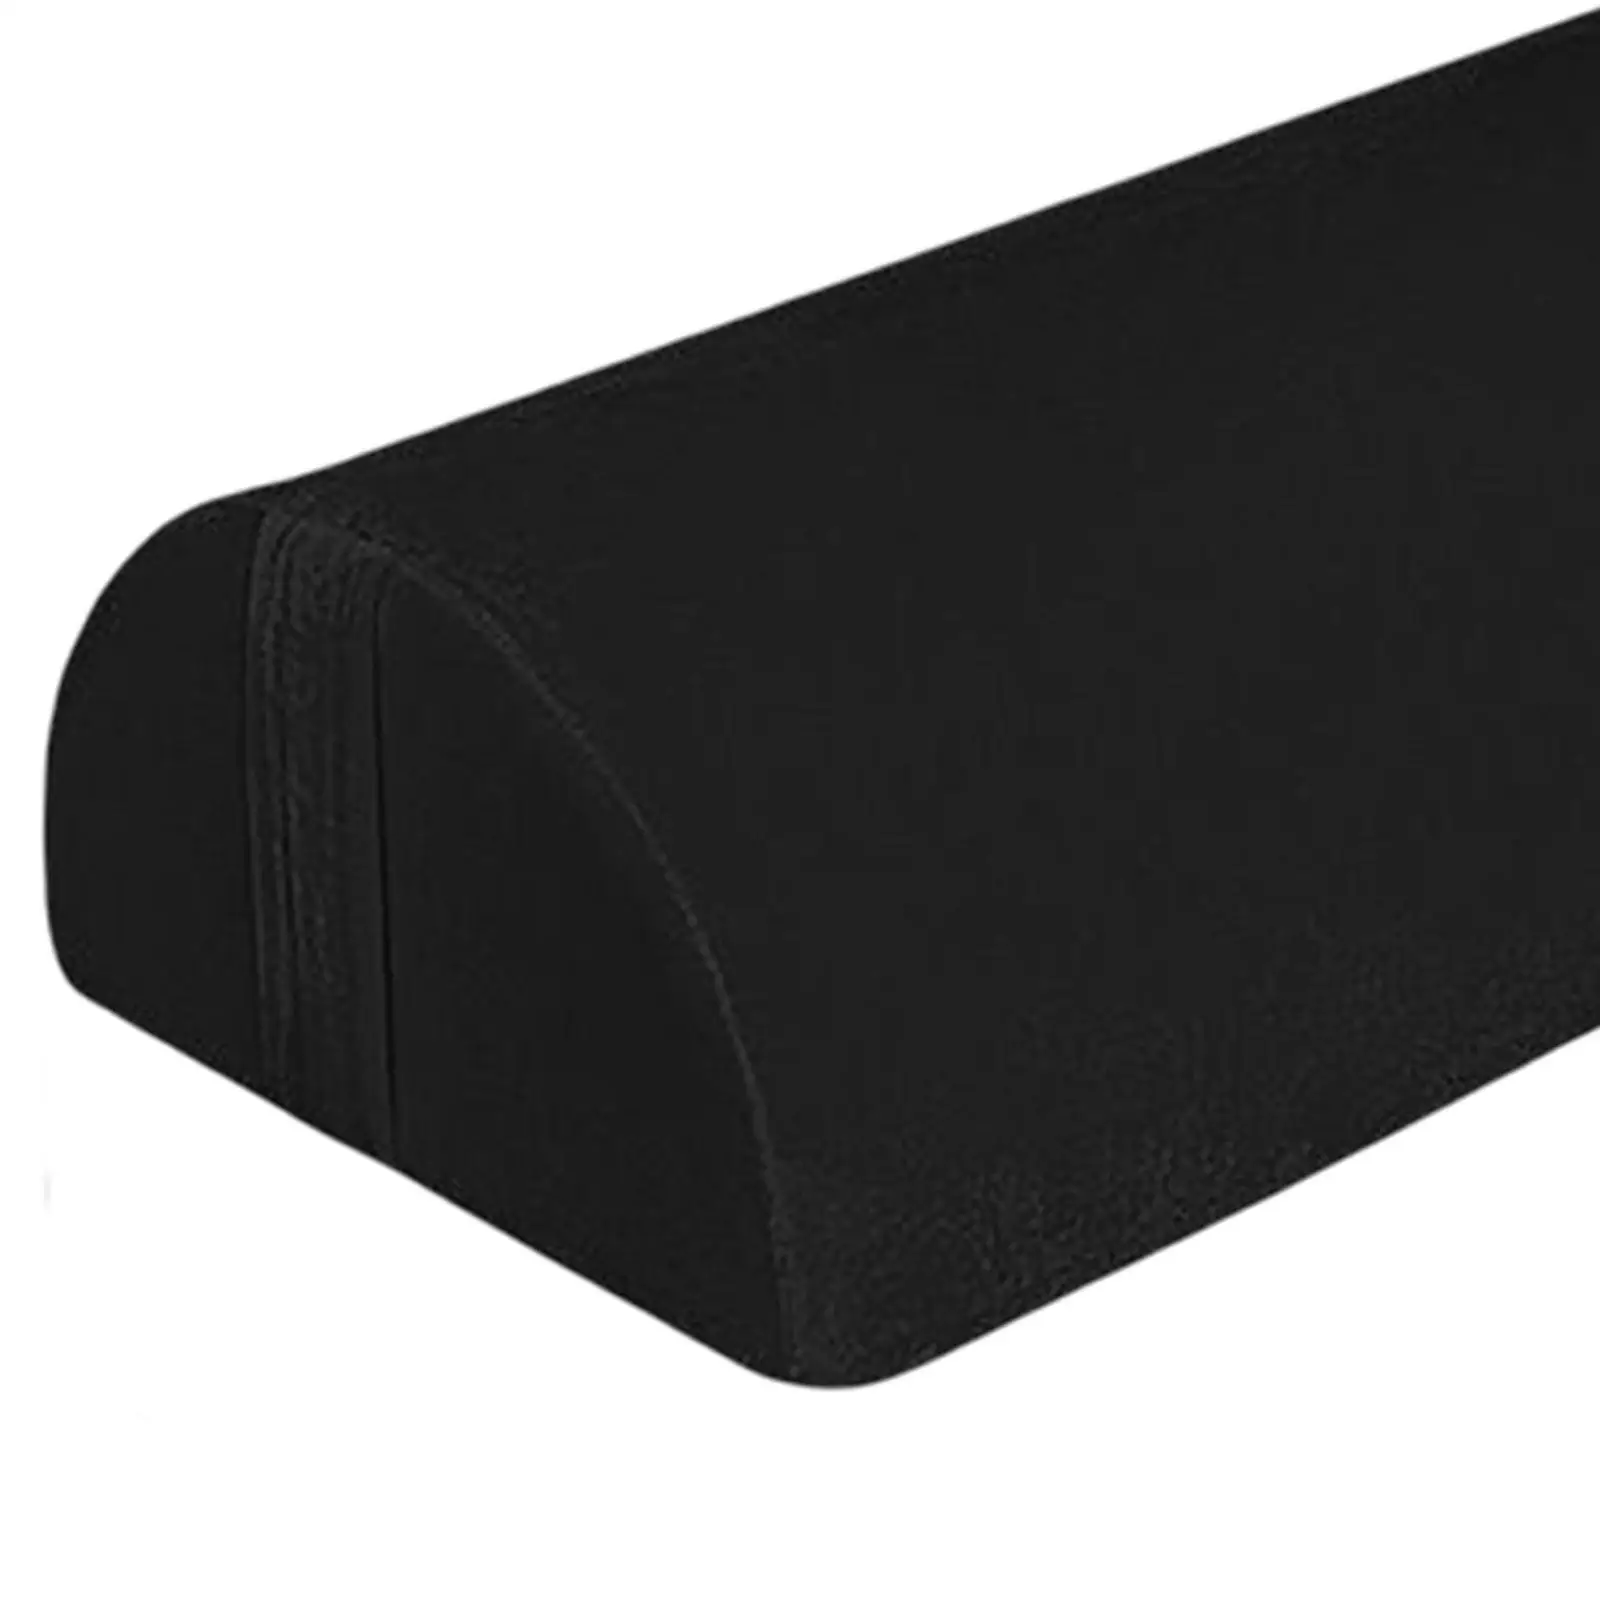 Comfort Leg support Ergonomic Footrest Pillow Foot Rest Under Desk for Bed Car Gift Piano Office Accessories